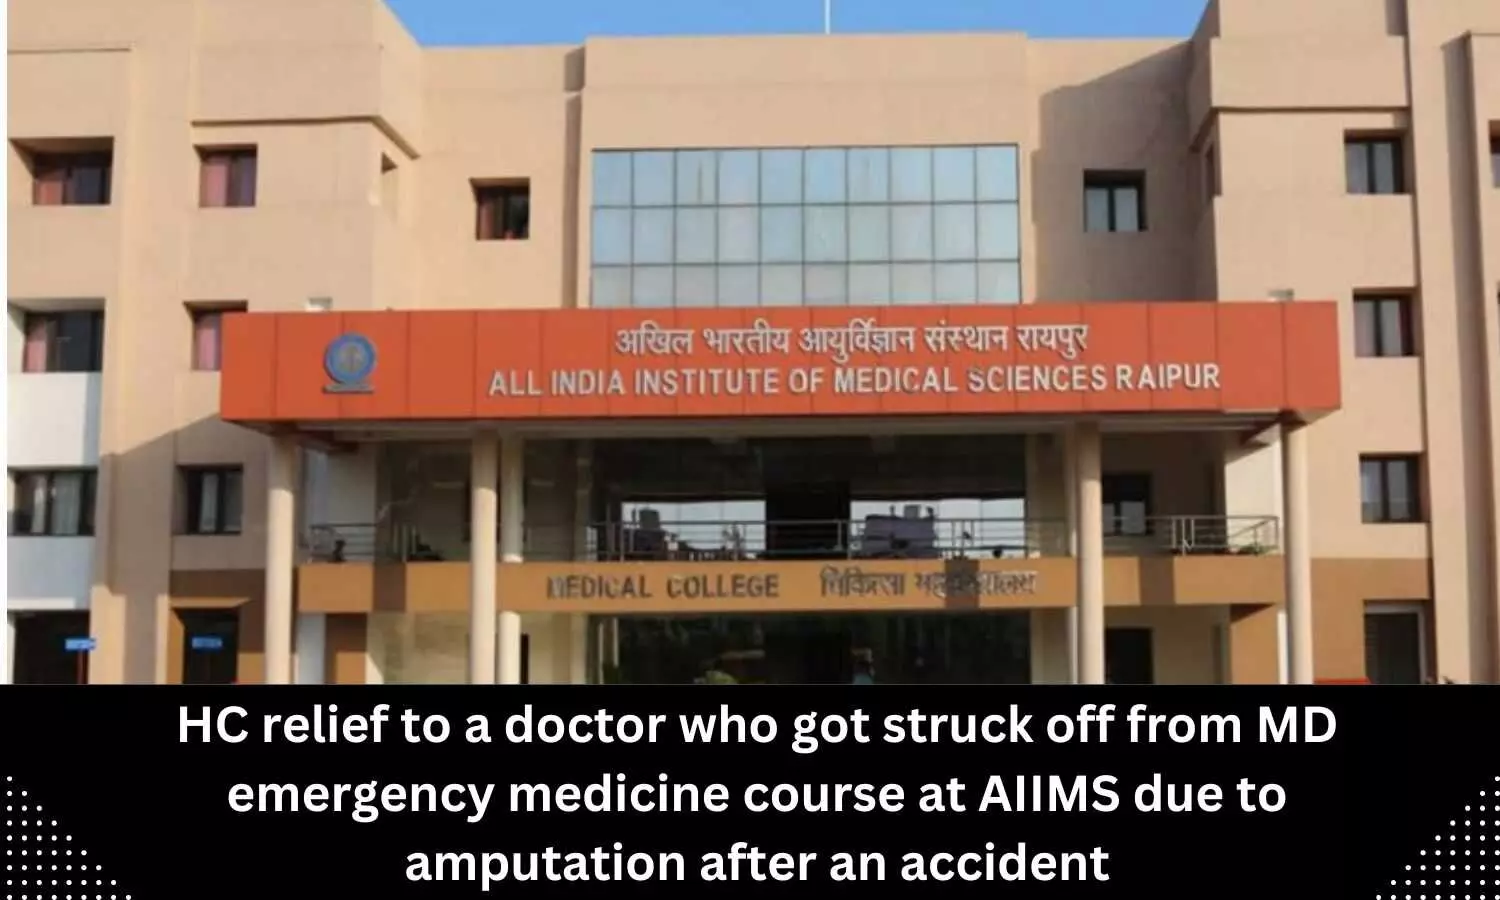 Doctor who got struck off from MD emergency medicine course at AIIMS due to amputation after accident gets HC relief